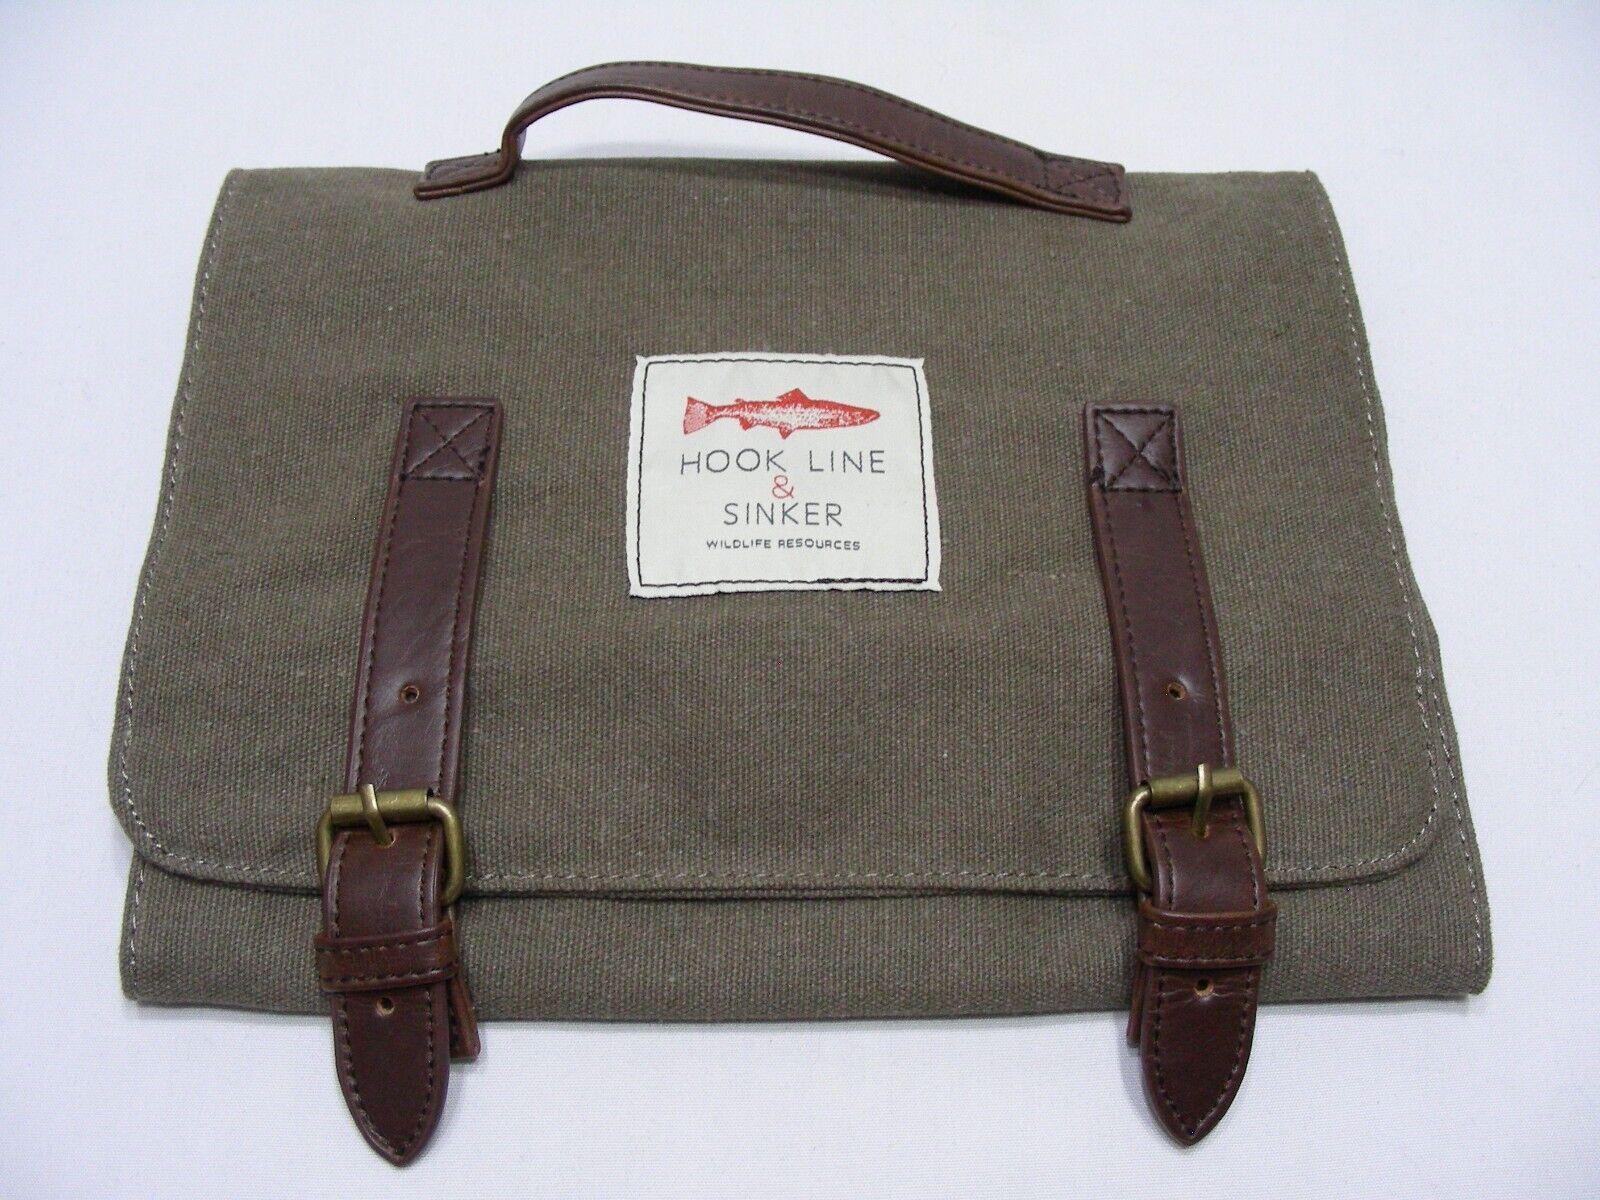 HOOK LINE & SINKER - WILDLIFE RESOURCES - Fishing Themed Canvas/Leather  Bag!